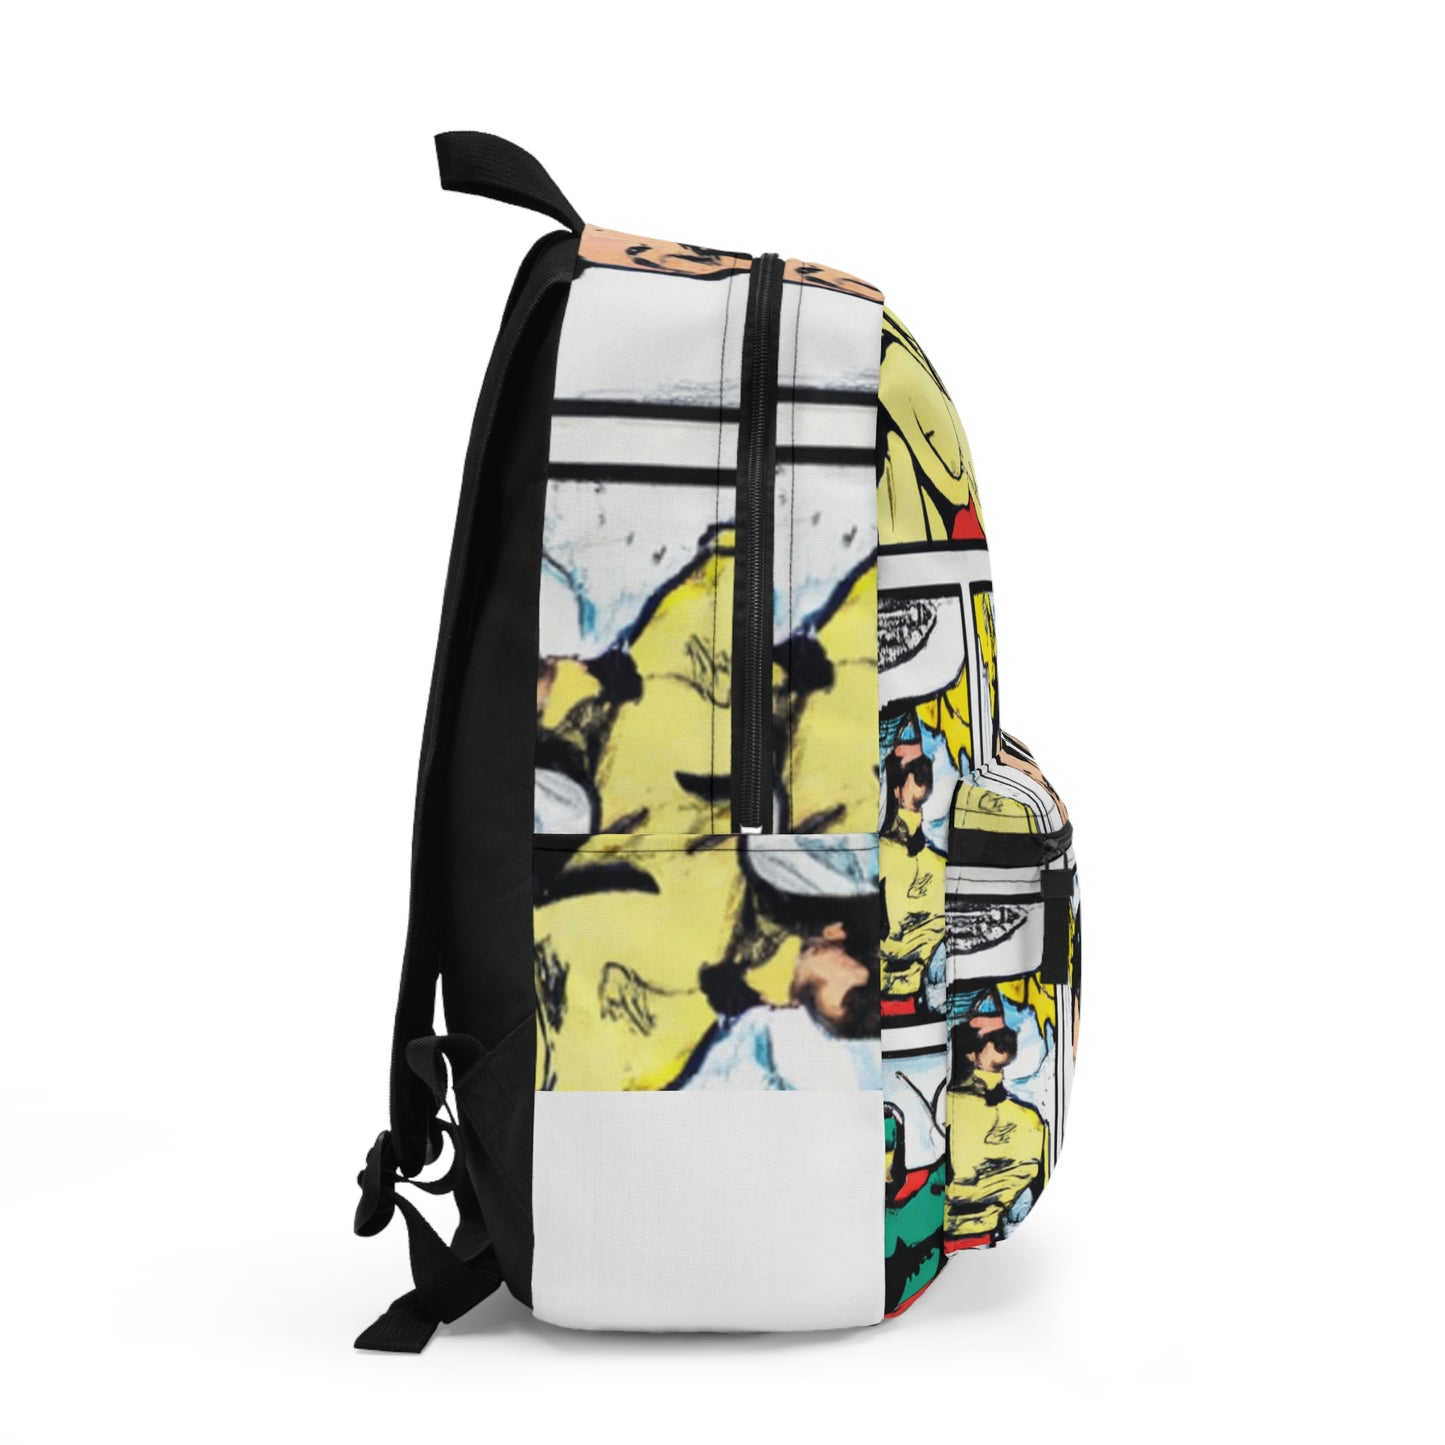 Captain Cosmo - Comic Book Backpack 1 of 1 Collectible